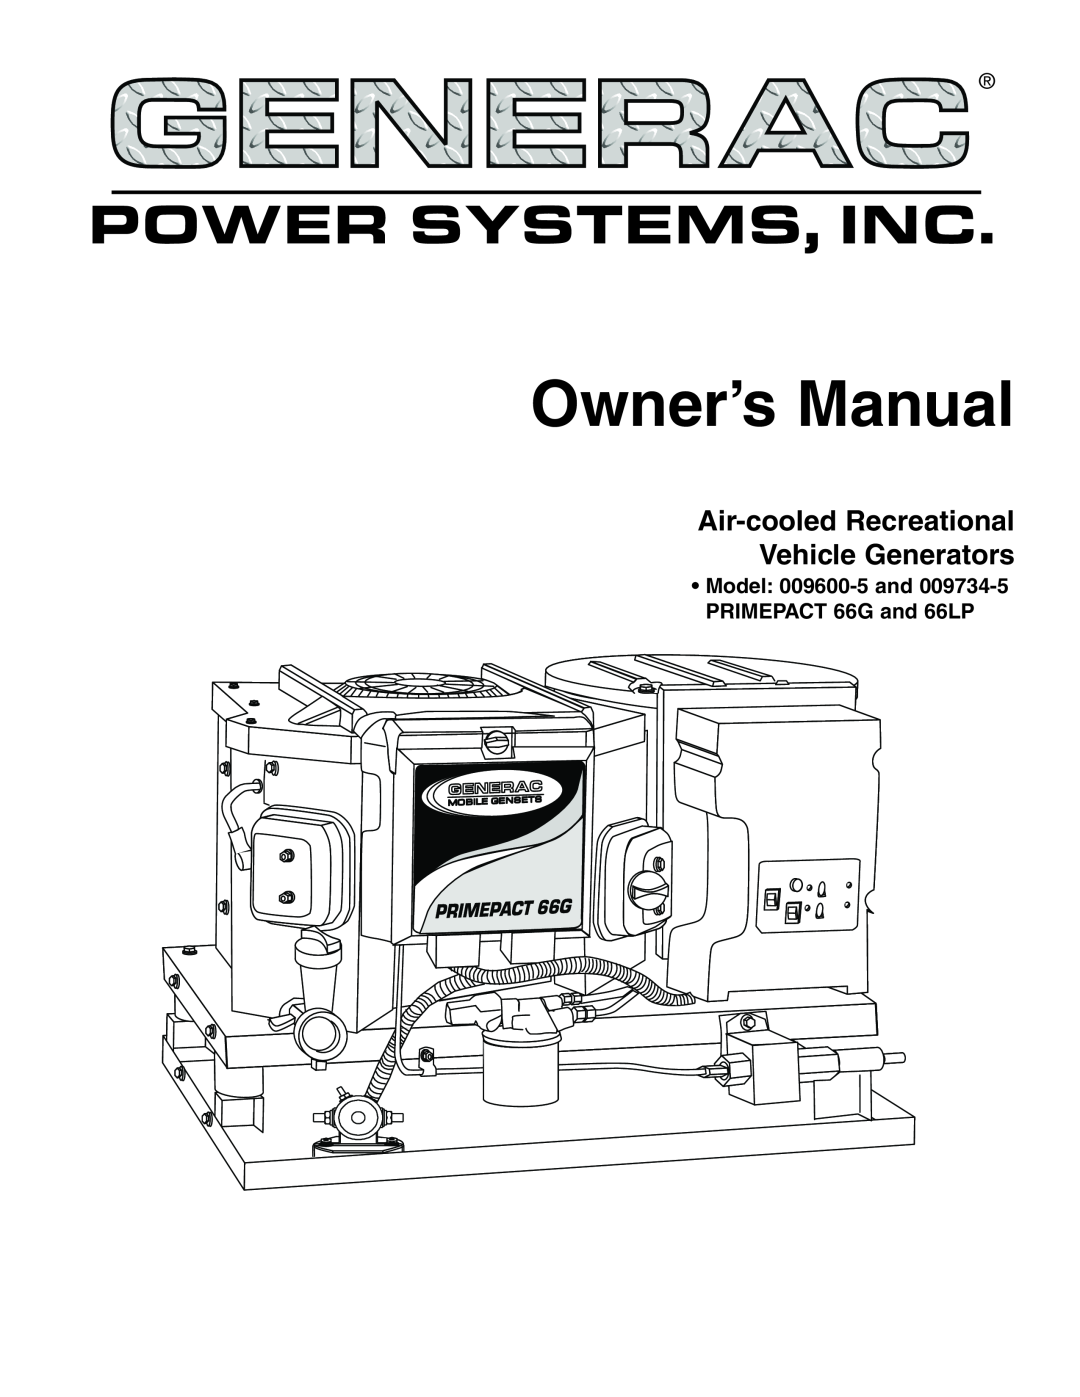 Generac Power Systems 009600-5, 009734-5 owner manual • Model: 009600-5and PRIMEPACT 66G and 66LP, Owner’s Manual 